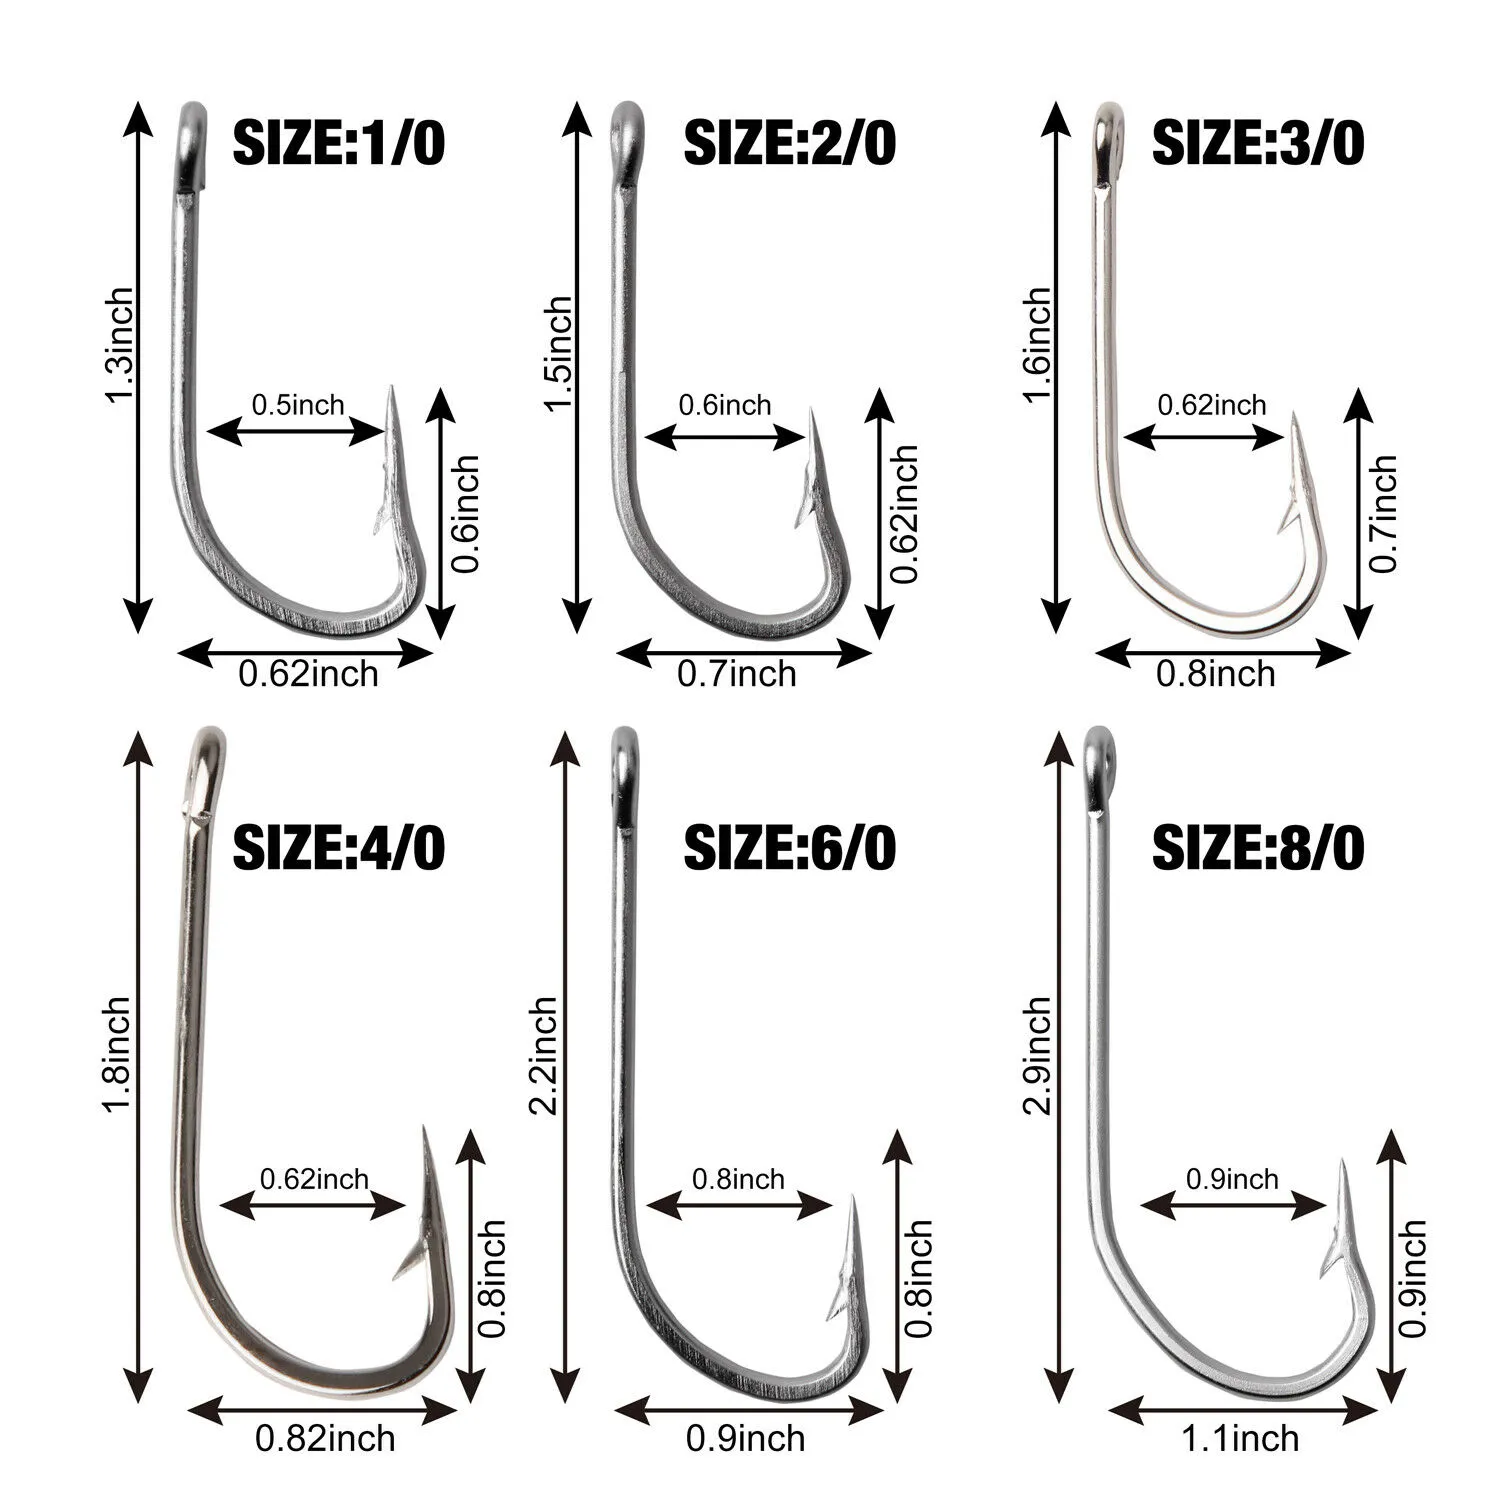 Stainless Steel Saltwater Fishing Hooks Kit Long Shank 1/0 5/0 Tackle  Supplier For Hooks, Lures & Gears. From Enjoyoutdoors, $9.86